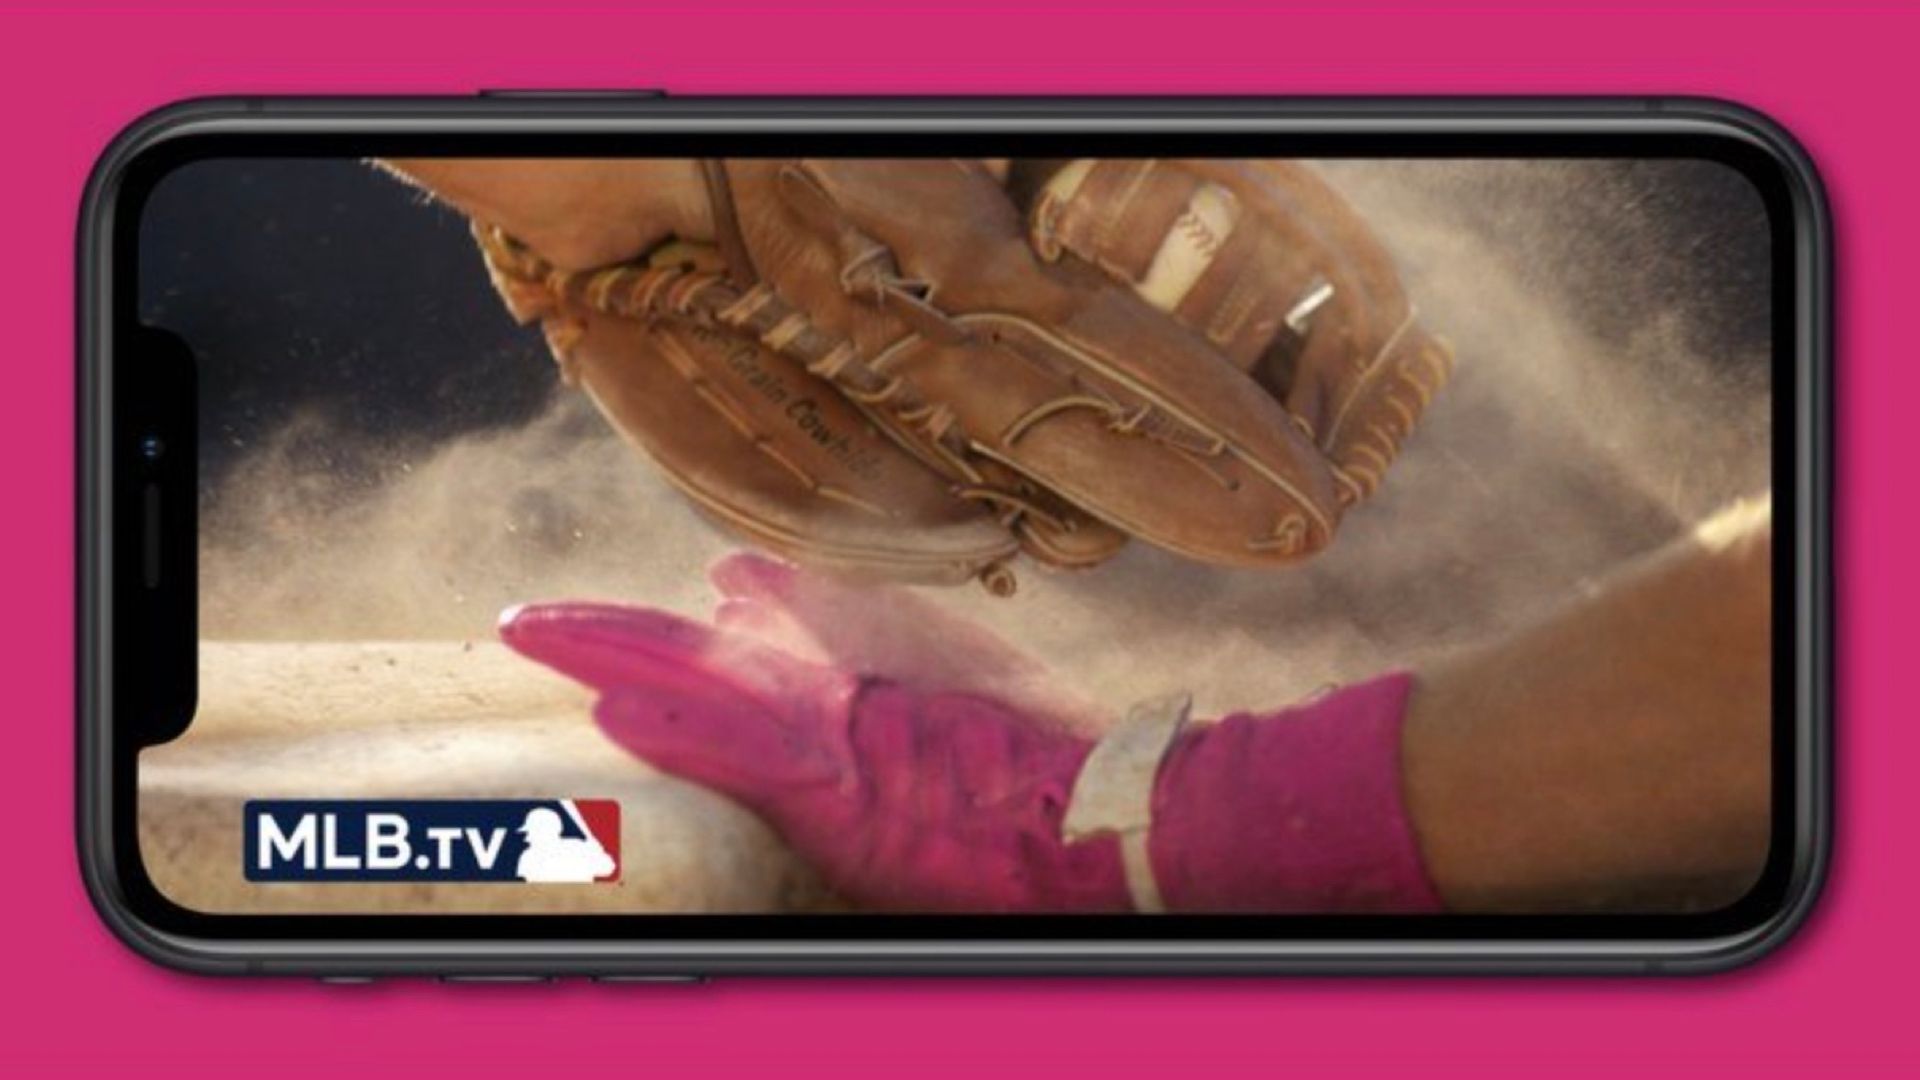 TMobile is giving away free MLBTV again  The Verge